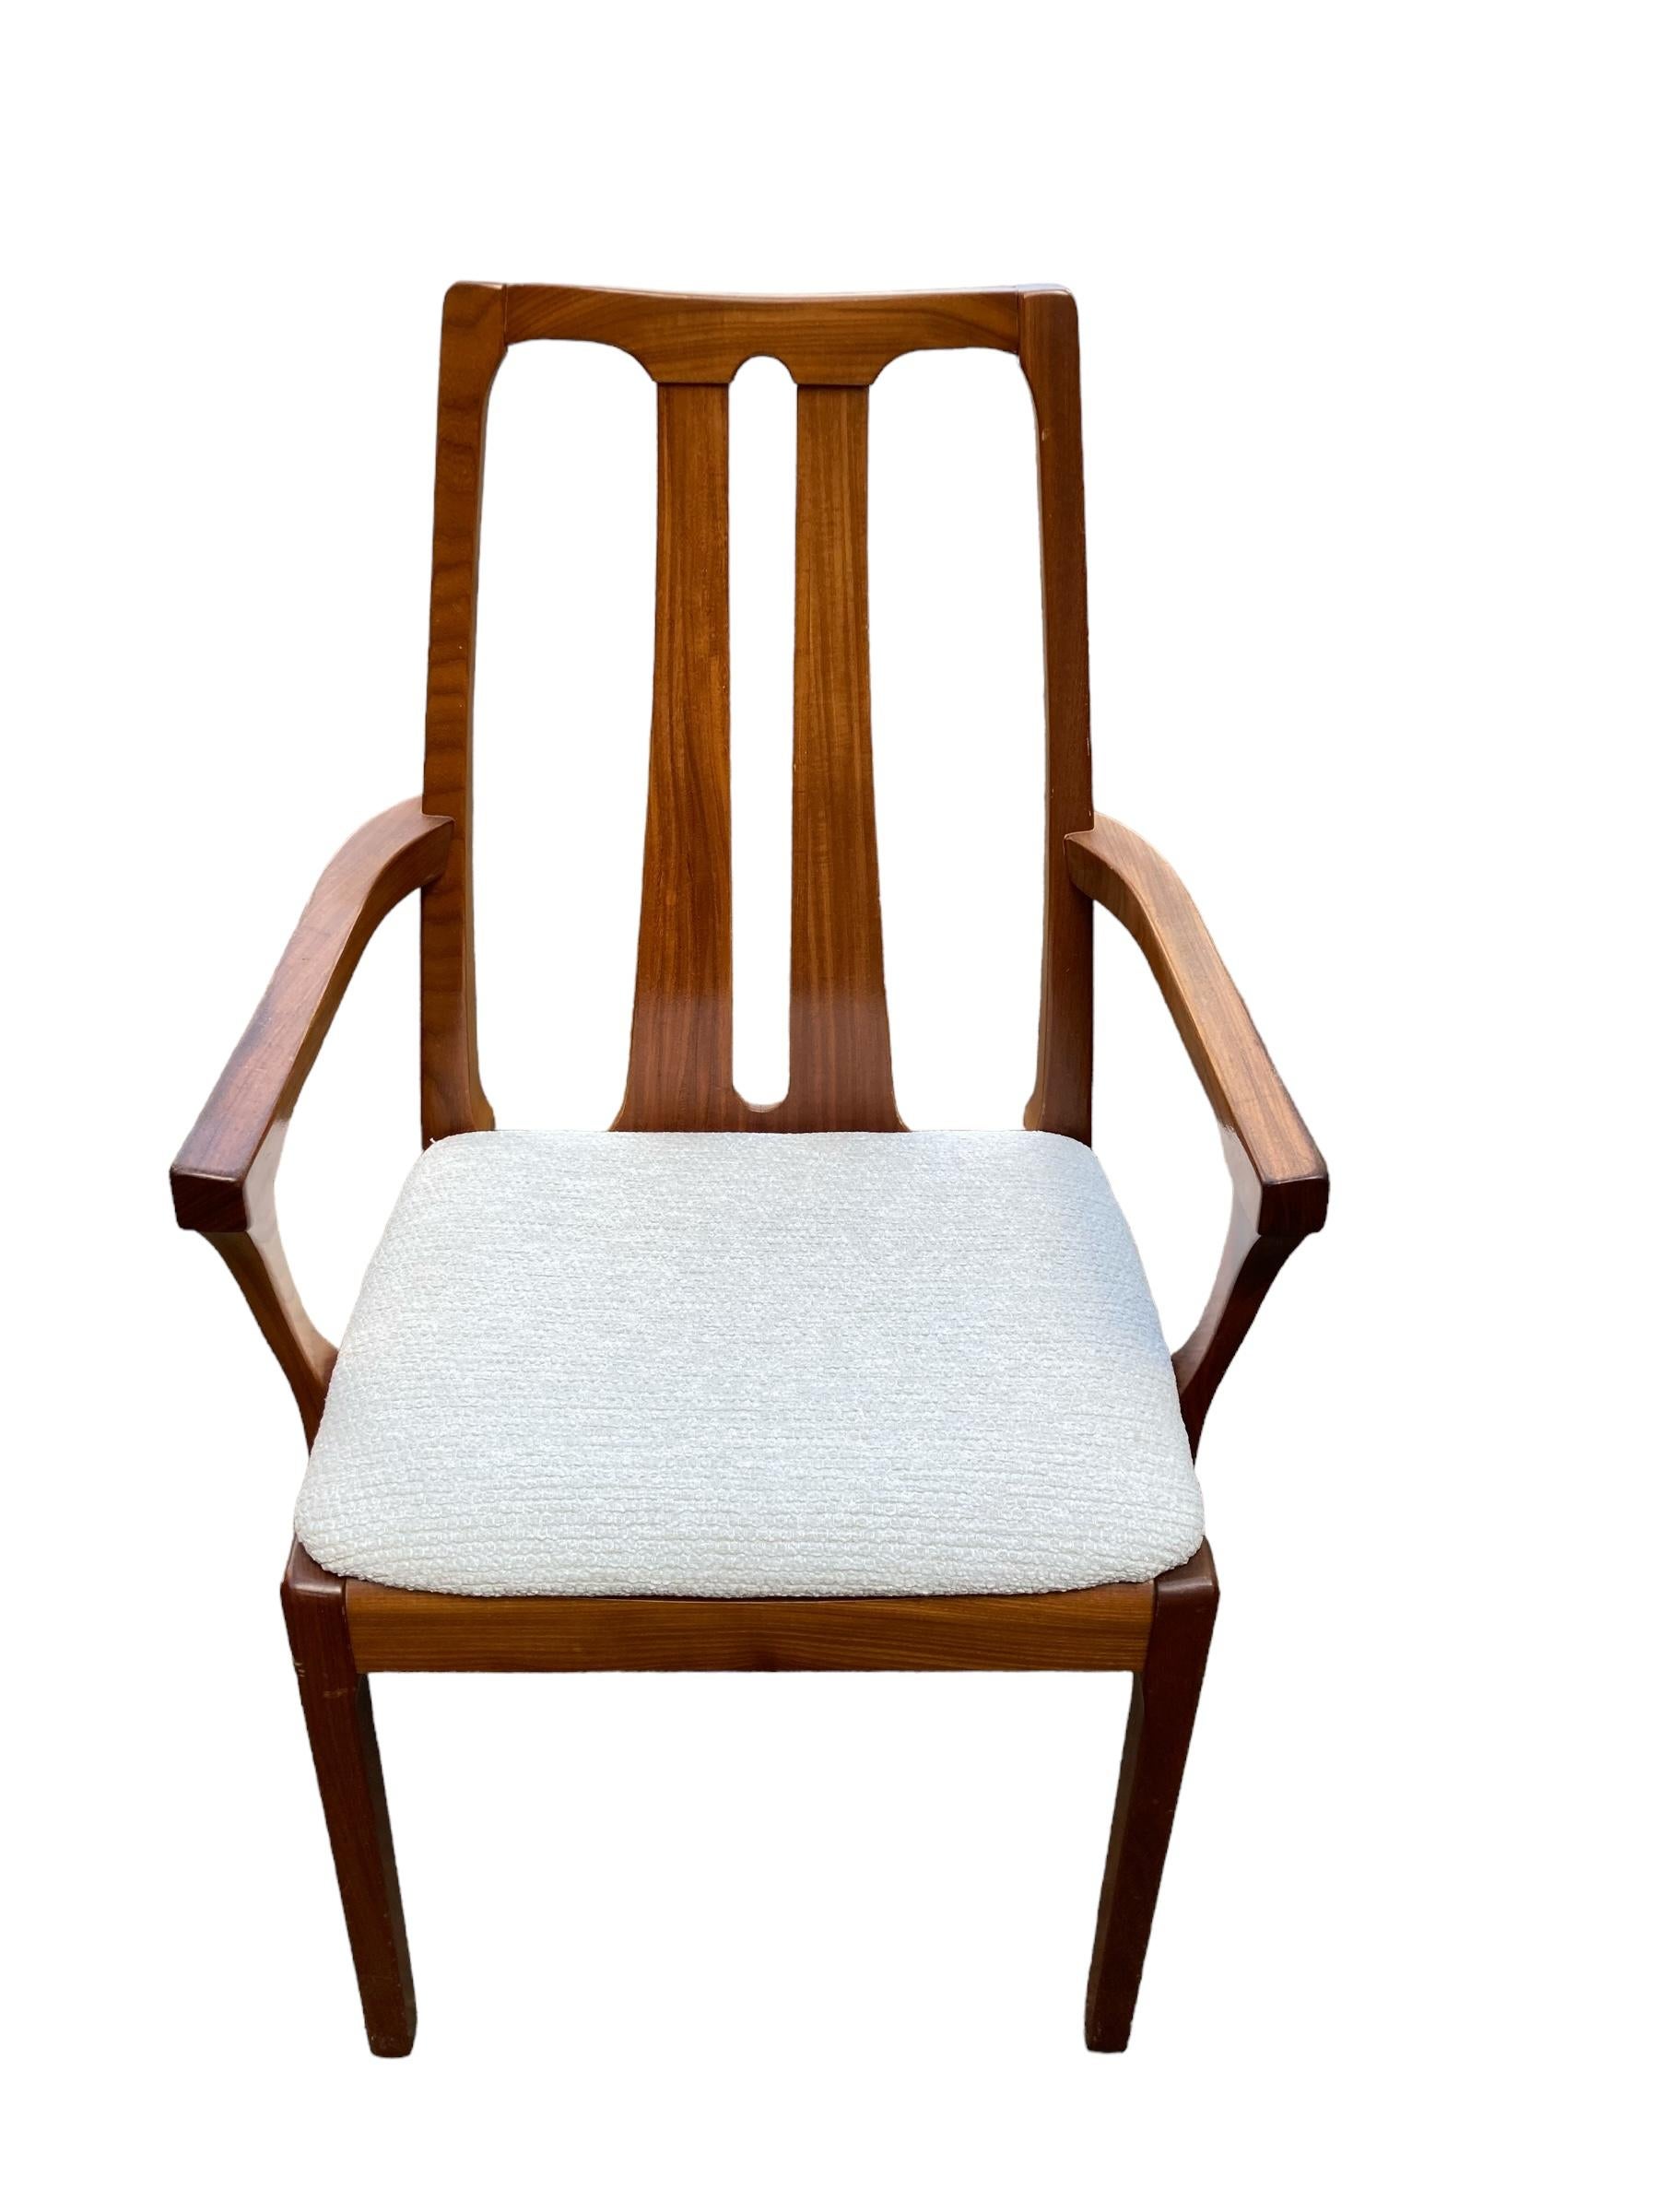 20th Century Set of For Mid Century Teak Nathan Dining Chairs with two carvers For Sale